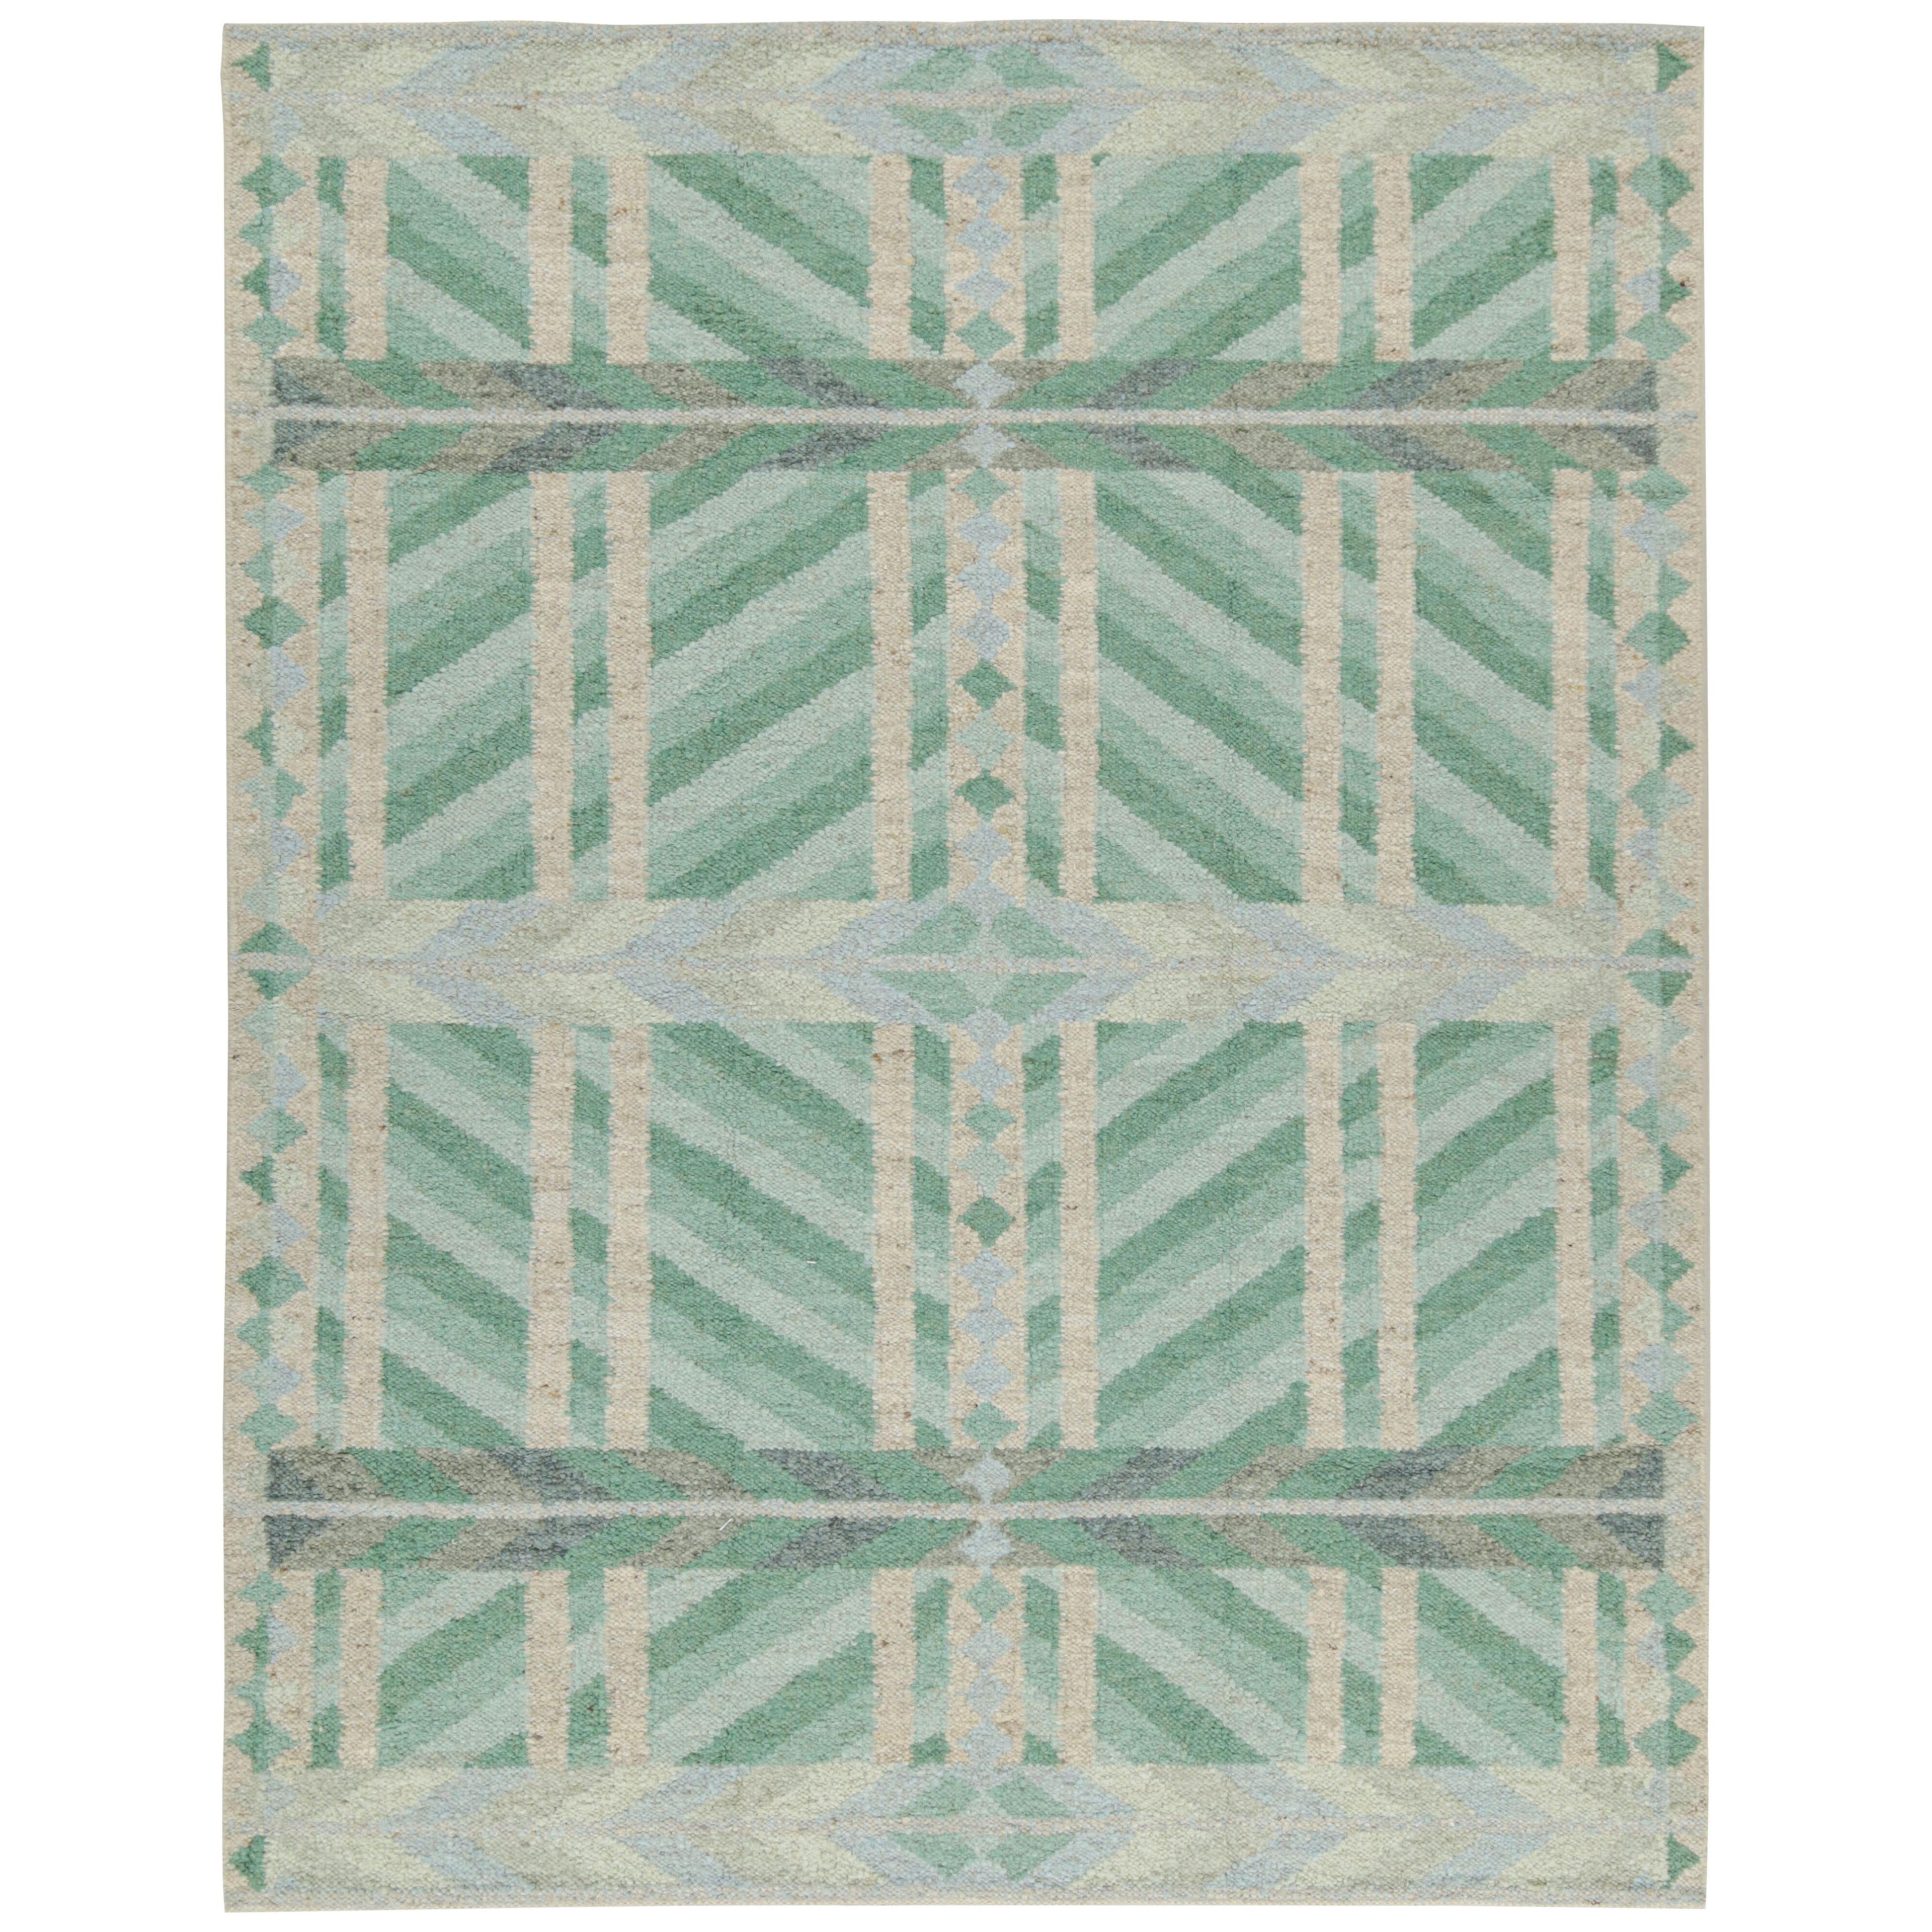 Rug & Kilim’s Scandinavian Style Kilim With Green And Blue Geometric Patterns